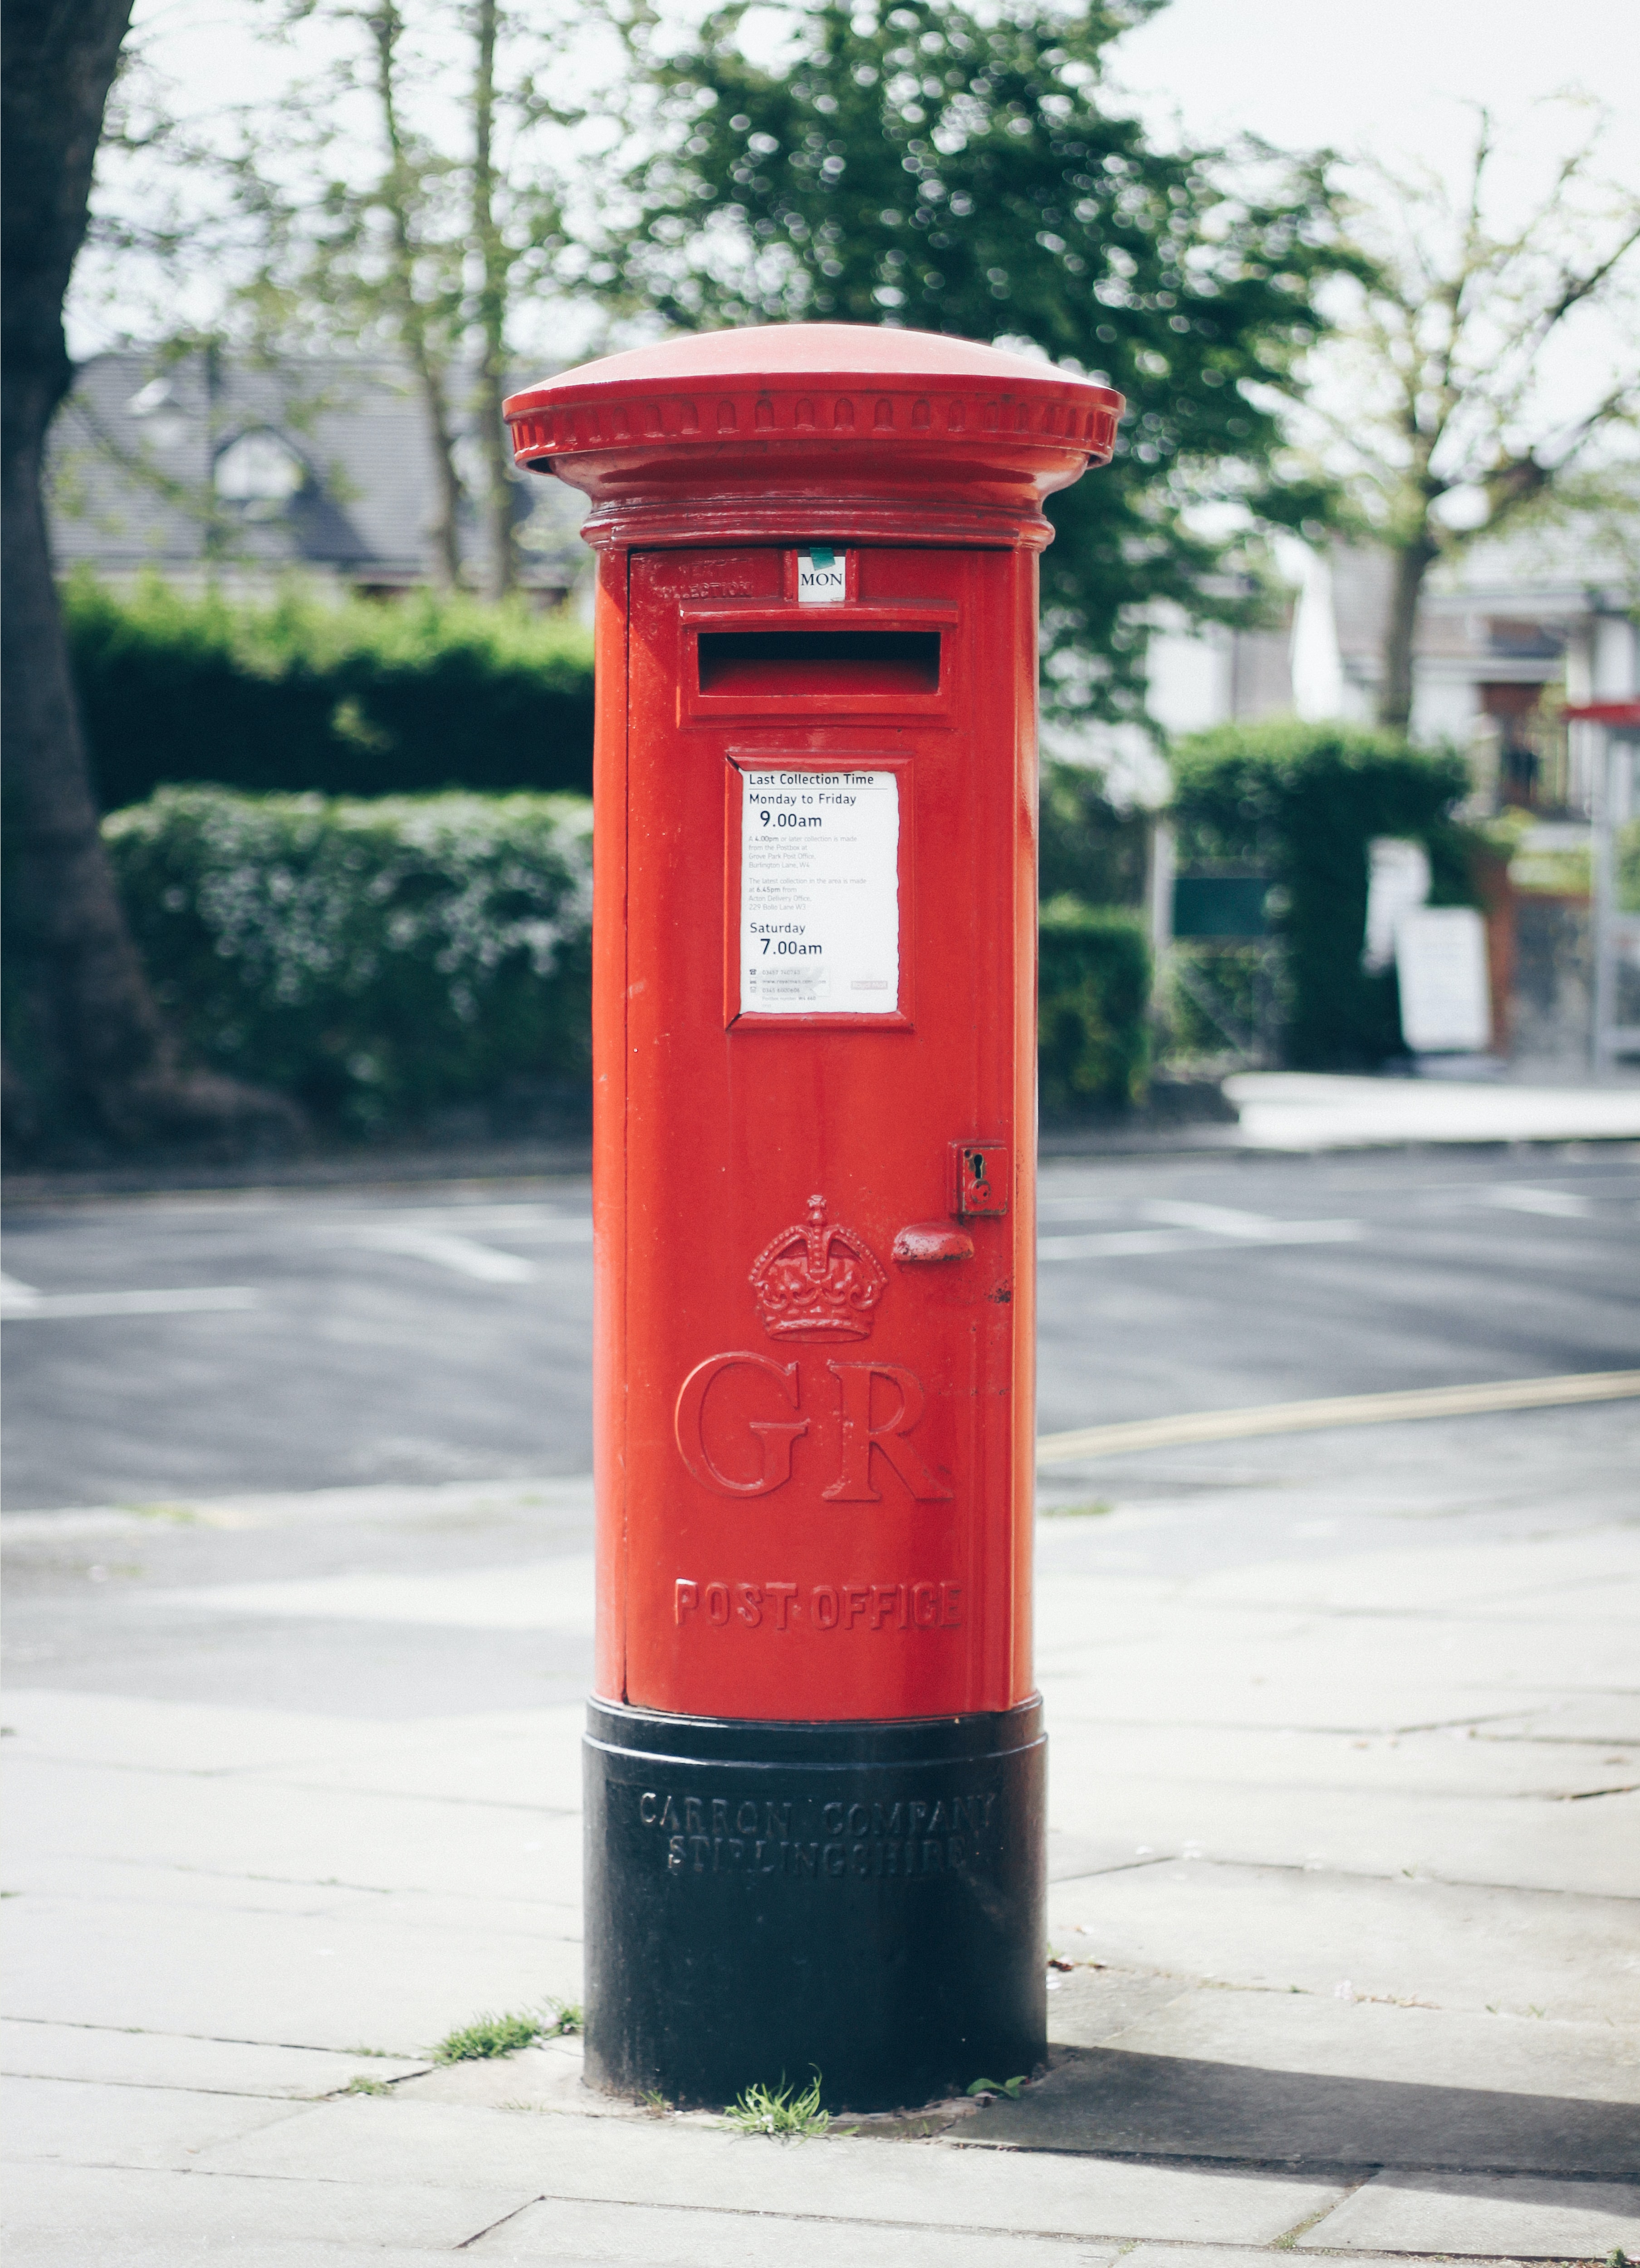 A red UK pillar post box. The background is a blurred street with bushes and trees.